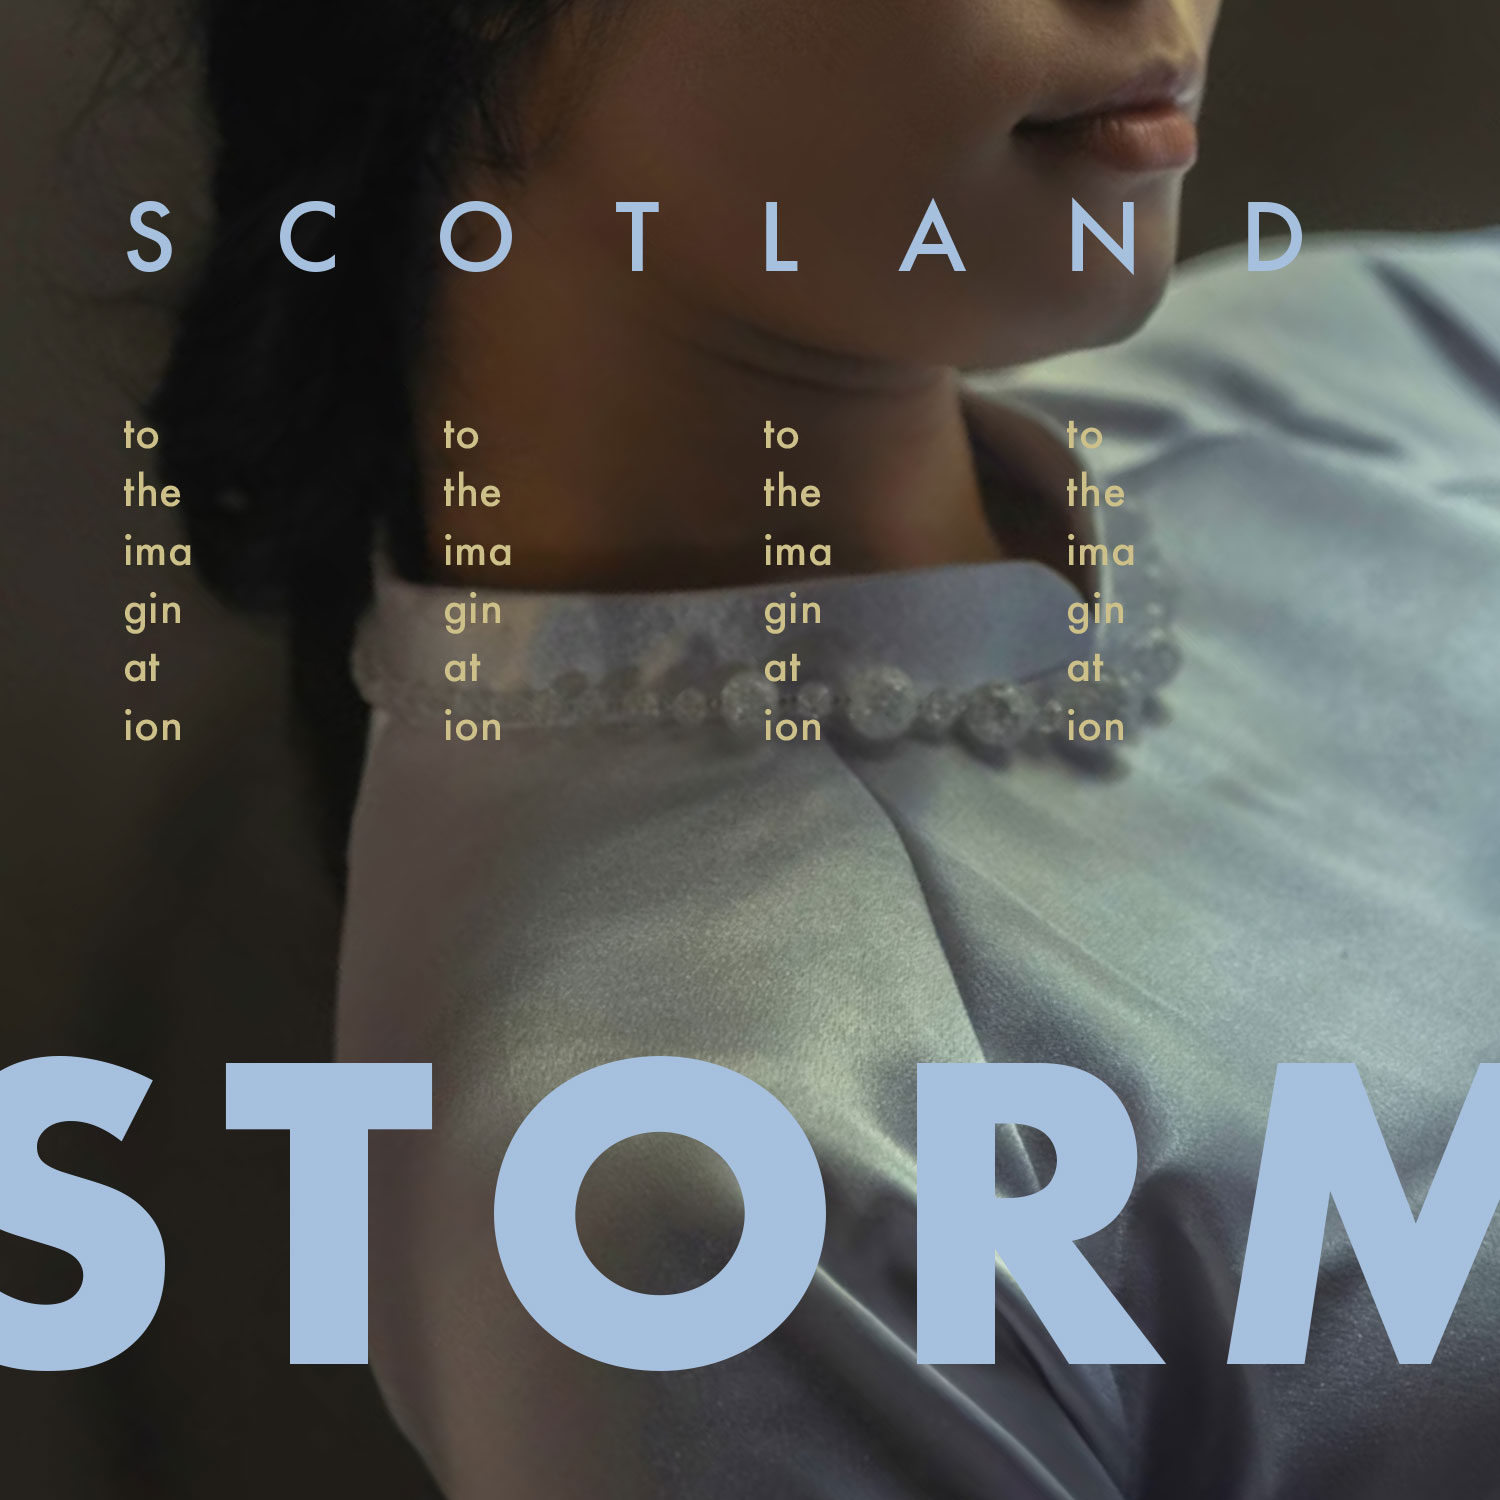 Version four. The image has been cropped so that the lady is seen just from her shoulder to her lips. The word 'storm' takes up much of the bottom half of the composition in bold, capital letters.